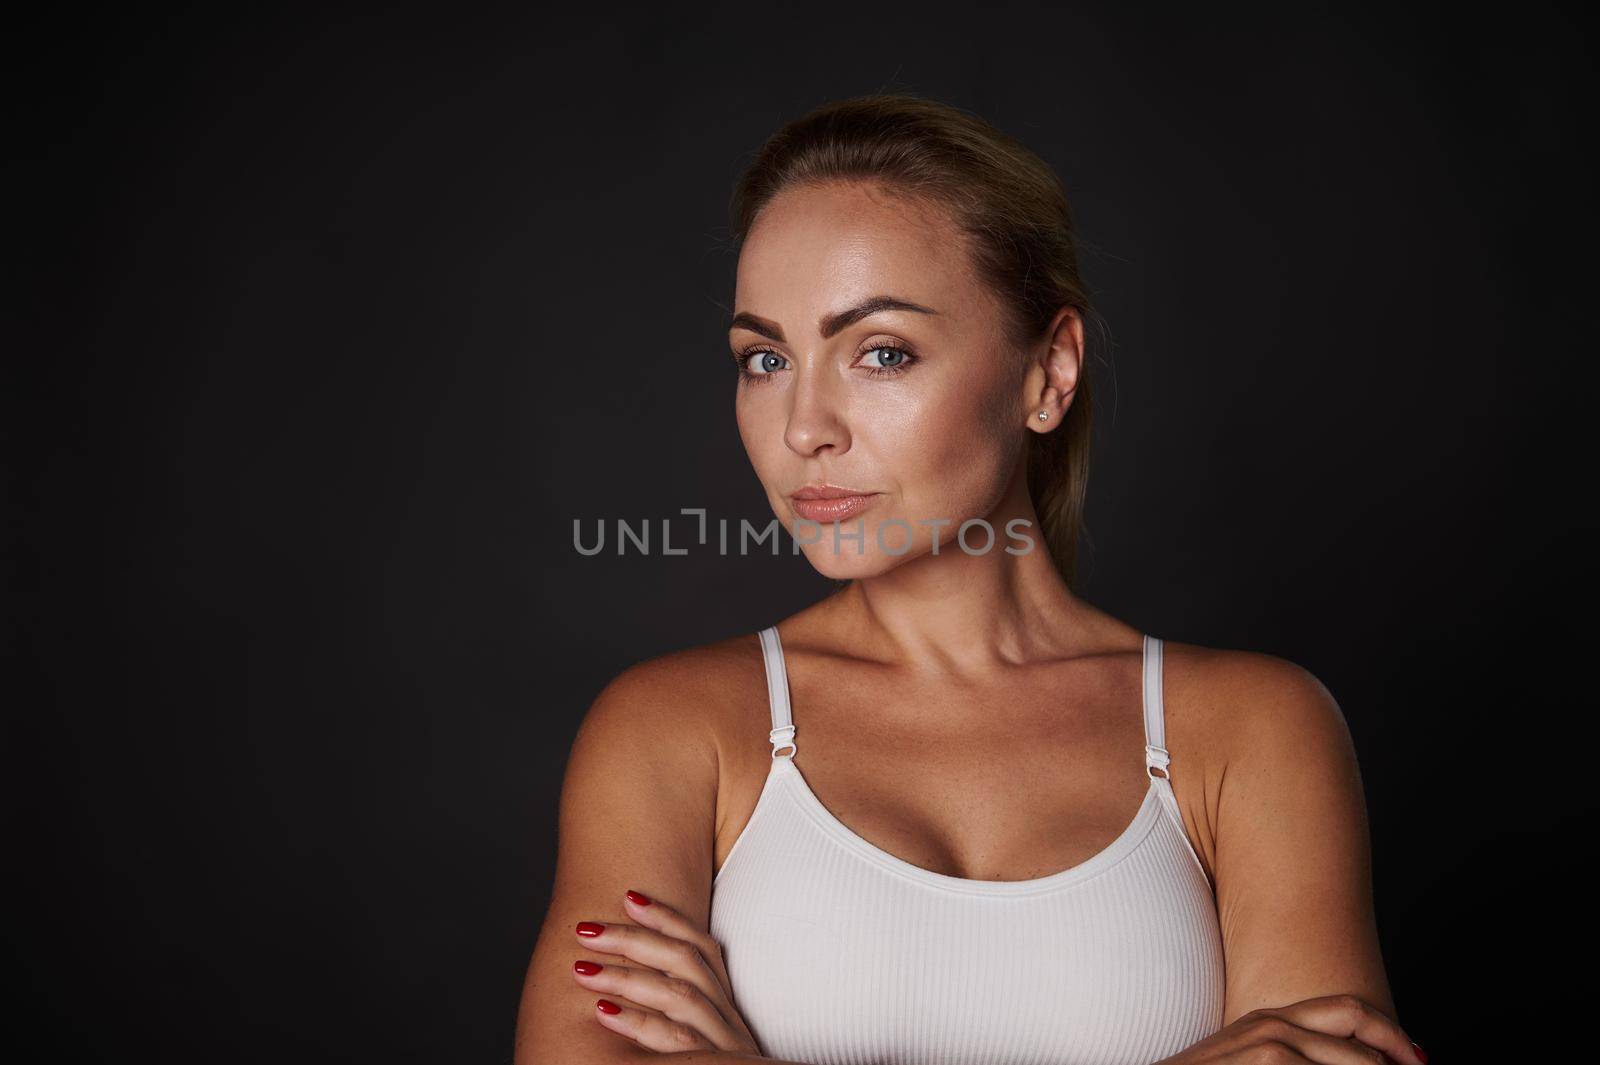 Waist length portrait of an attractive young blonde woman with natural makeup and beautiful aesthetic body wearing a white top standing with crossed arms against black background with copy space